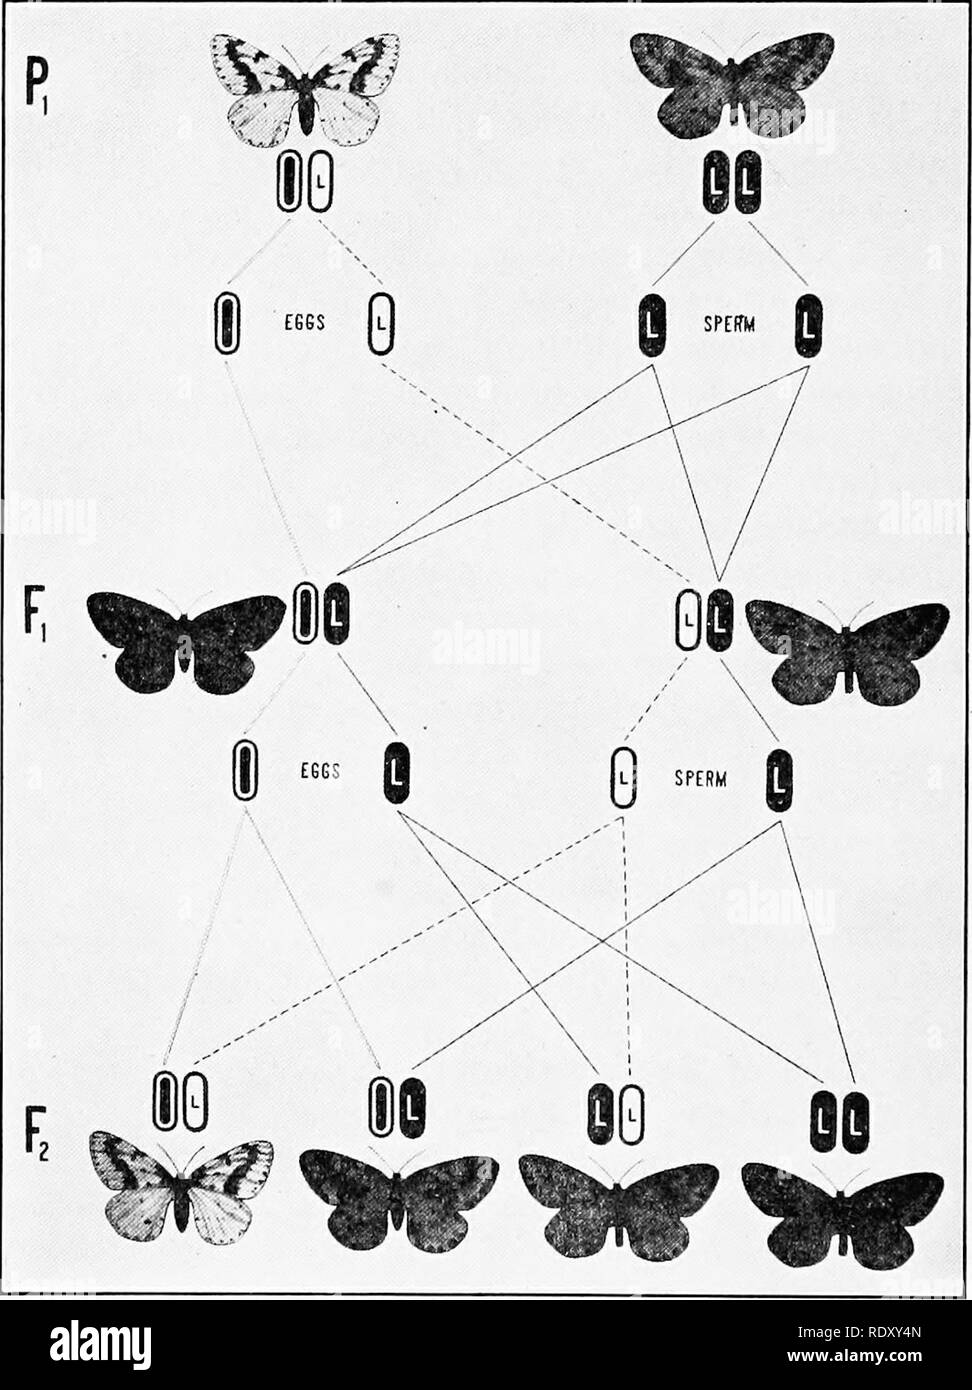 . Genetics in relation to agriculture. Livestock; Heredity; Variation (Biology); Plant breeding. 206 GENETICS IN RELATION TO AGRICULTURE linked character. As it occurs in the wild, the currant moth is usually of the typical form which is characterized by dark markings on the wings which although highly variable are of characteristic shape and arranged in a definite pattern. This is the form styled grossulariata. Occasionally in nature, however, a female is discovered which is much lighter than. Fig. 93.—Diagram illustrating the inheritauce of laclicolor type in Abraxas. A lacticolar female mat Stock Photo